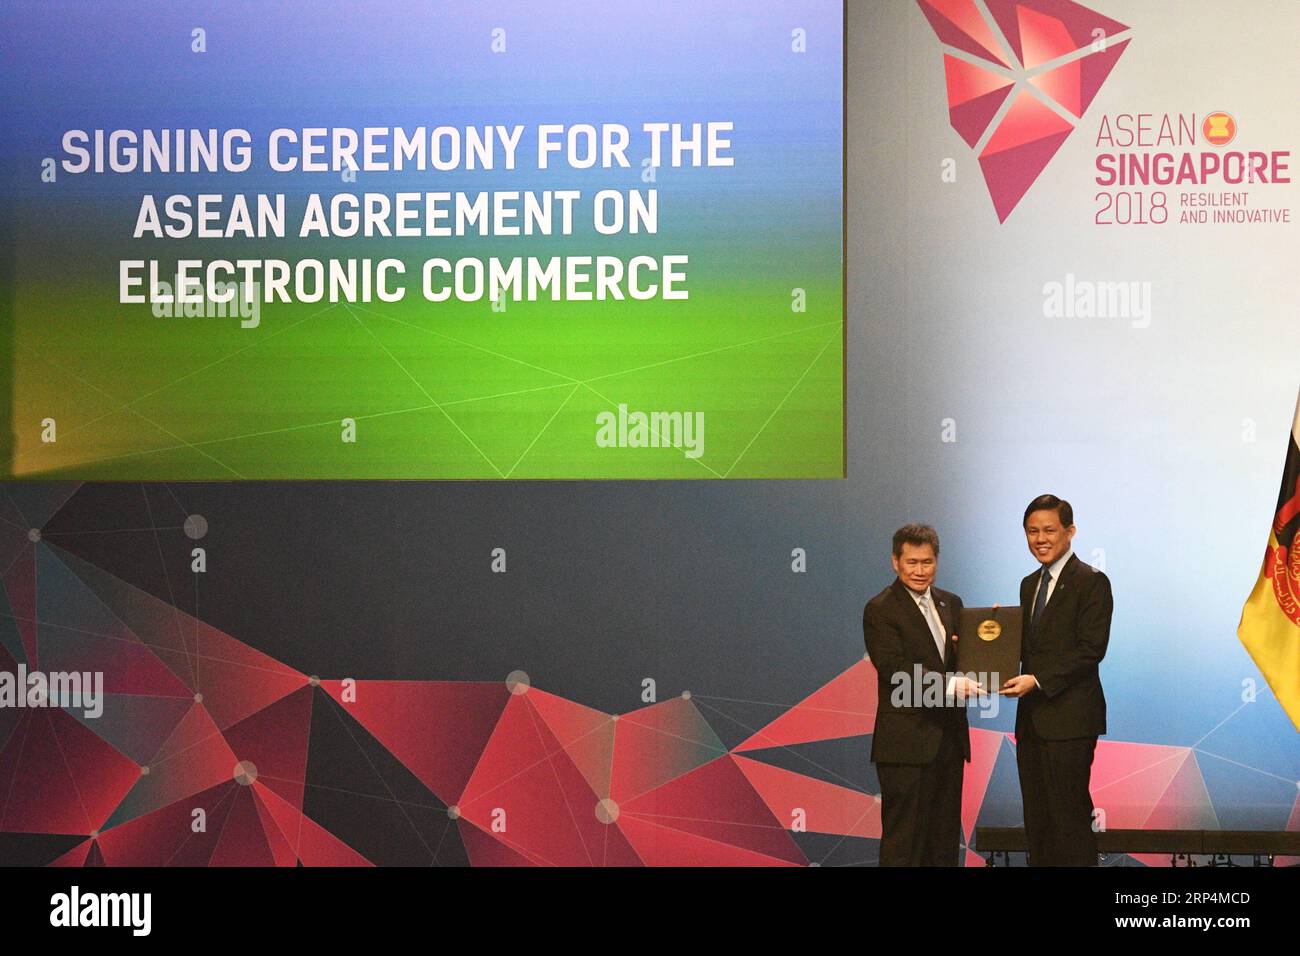 (181112) -- SINGAPORE, Nov. 12, 2018 -- Singaporean Minister for Trade and Industry Chan Chun Sing (R) hands over the signed document to ASEAN Secretary General Lim Jock Hoi during the signing ceremony of ASEAN s agreement on e-commerce, in Singapore, on Nov. 12, 2018. Trade ministers of the Association of Southeast Asian Nations (ASEAN) member states signed an agreement on e-commerce on Monday, encouraging paperless trading between businesses and governments of the bloc to generate rapid and efficient transactions. ) (nxl) SINGAPORE-ASEAN-E-COMMERCE-AGREEMENT ThenxChihxWey PUBLICATIONxNOTxINx Stock Photo